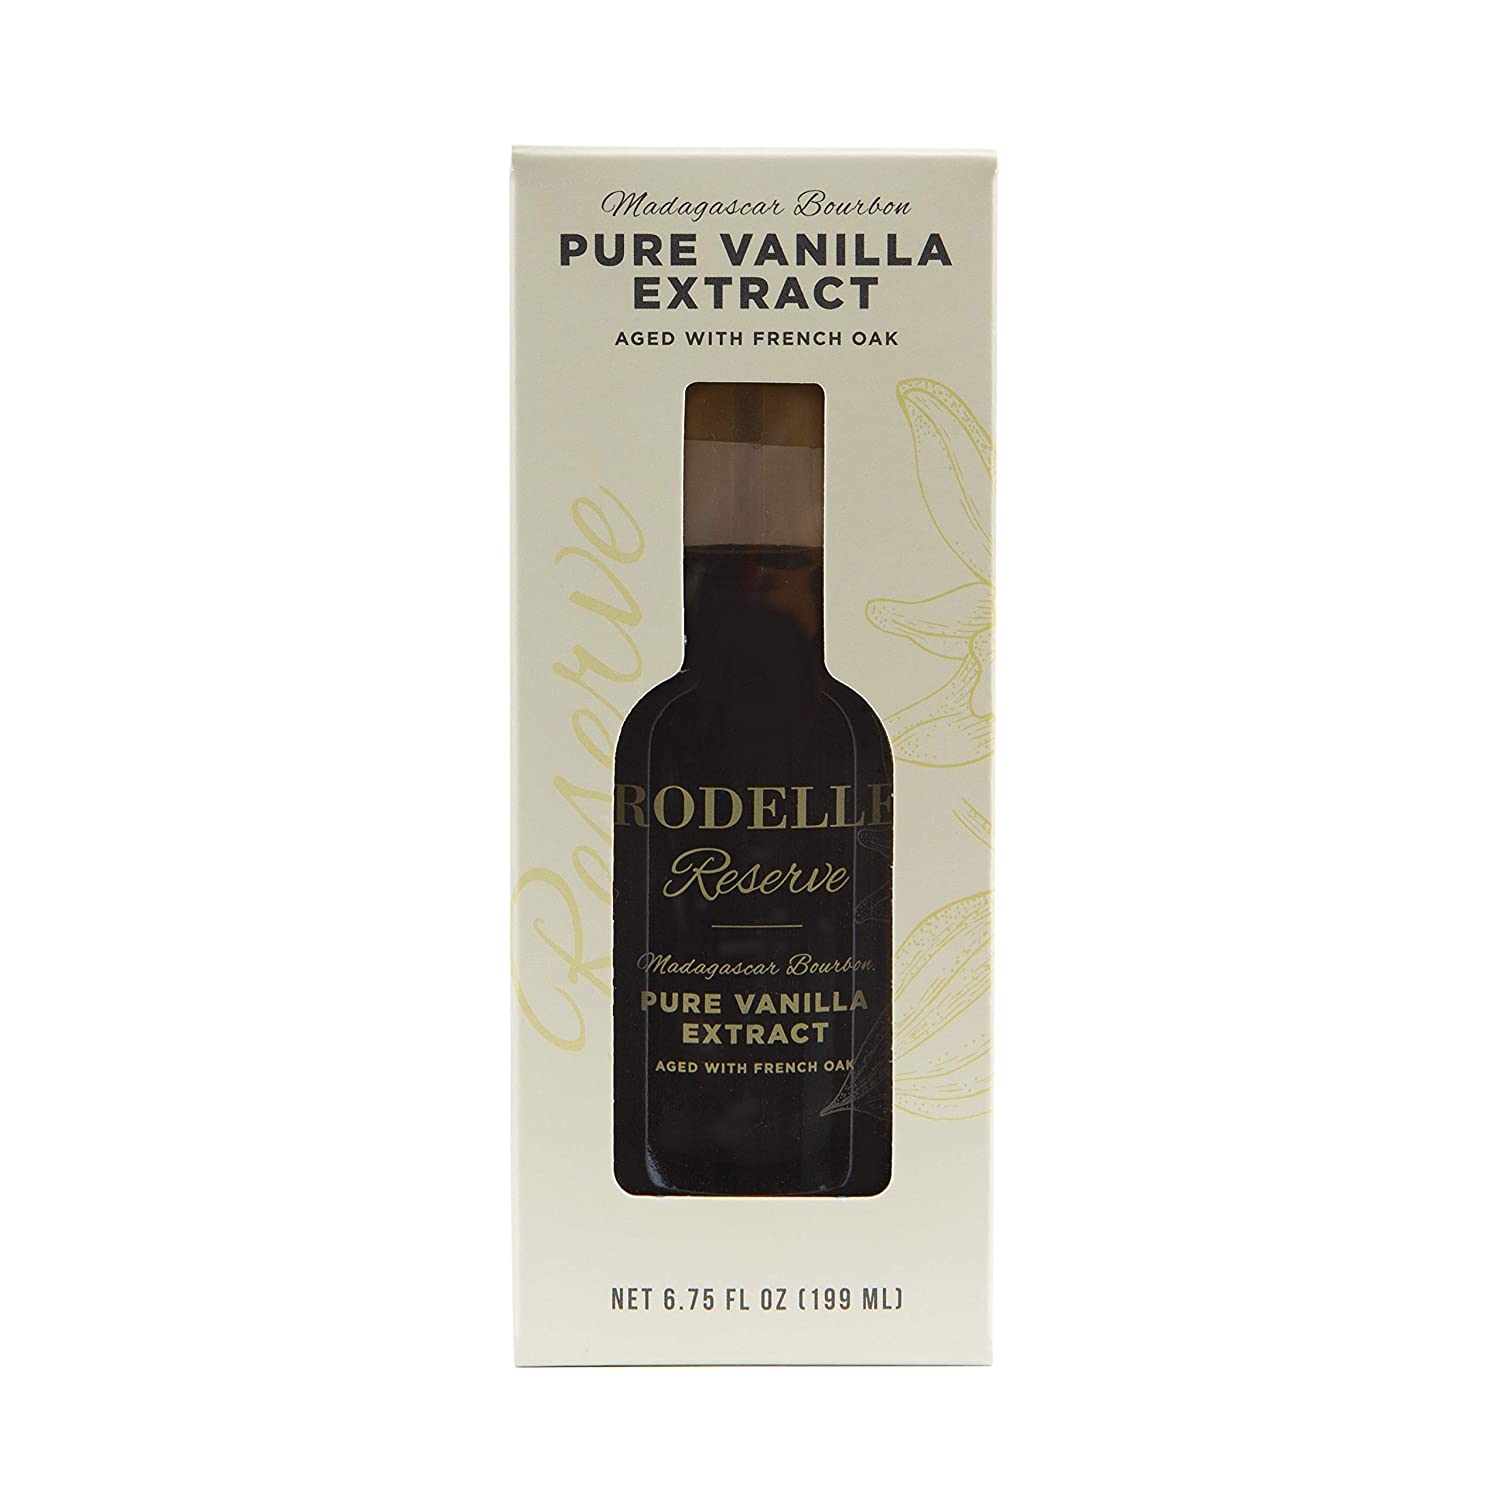 Rodelle Reserve Pure Vanilla Extract 6.75 oz - image 3 of 4